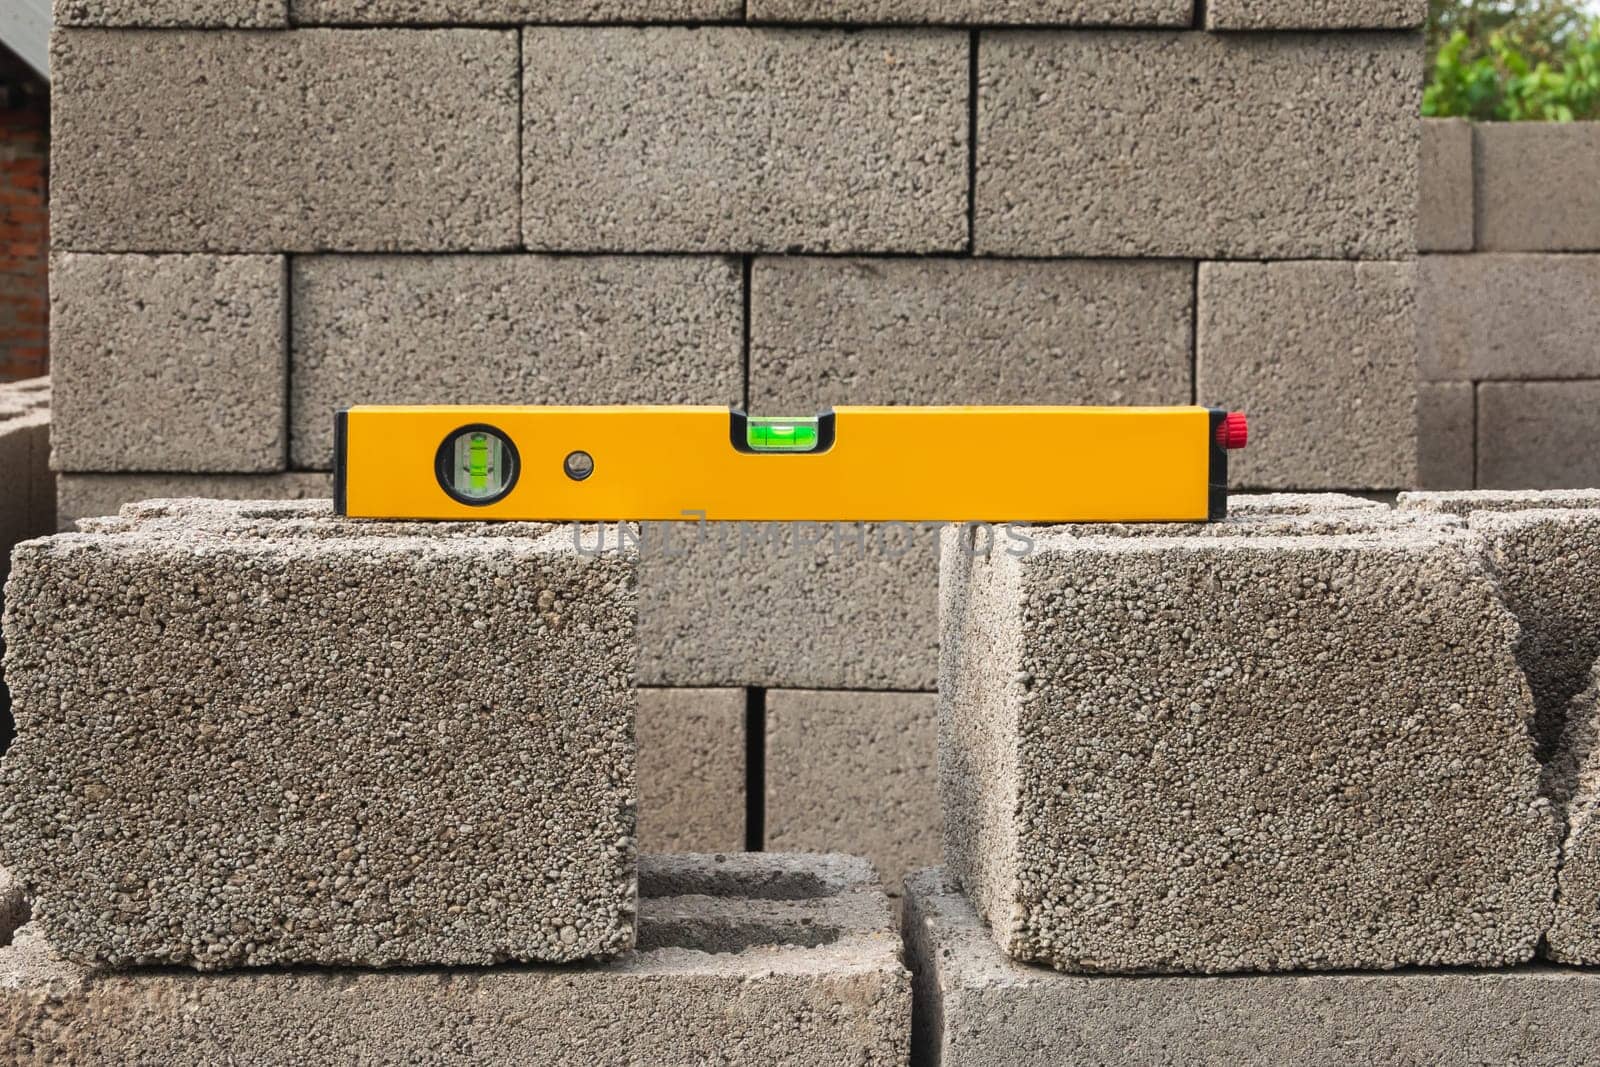 The bubble construction level lies on a cinder block construction stone. It is used by carpenters, masons, installers for various mounting and fastening works